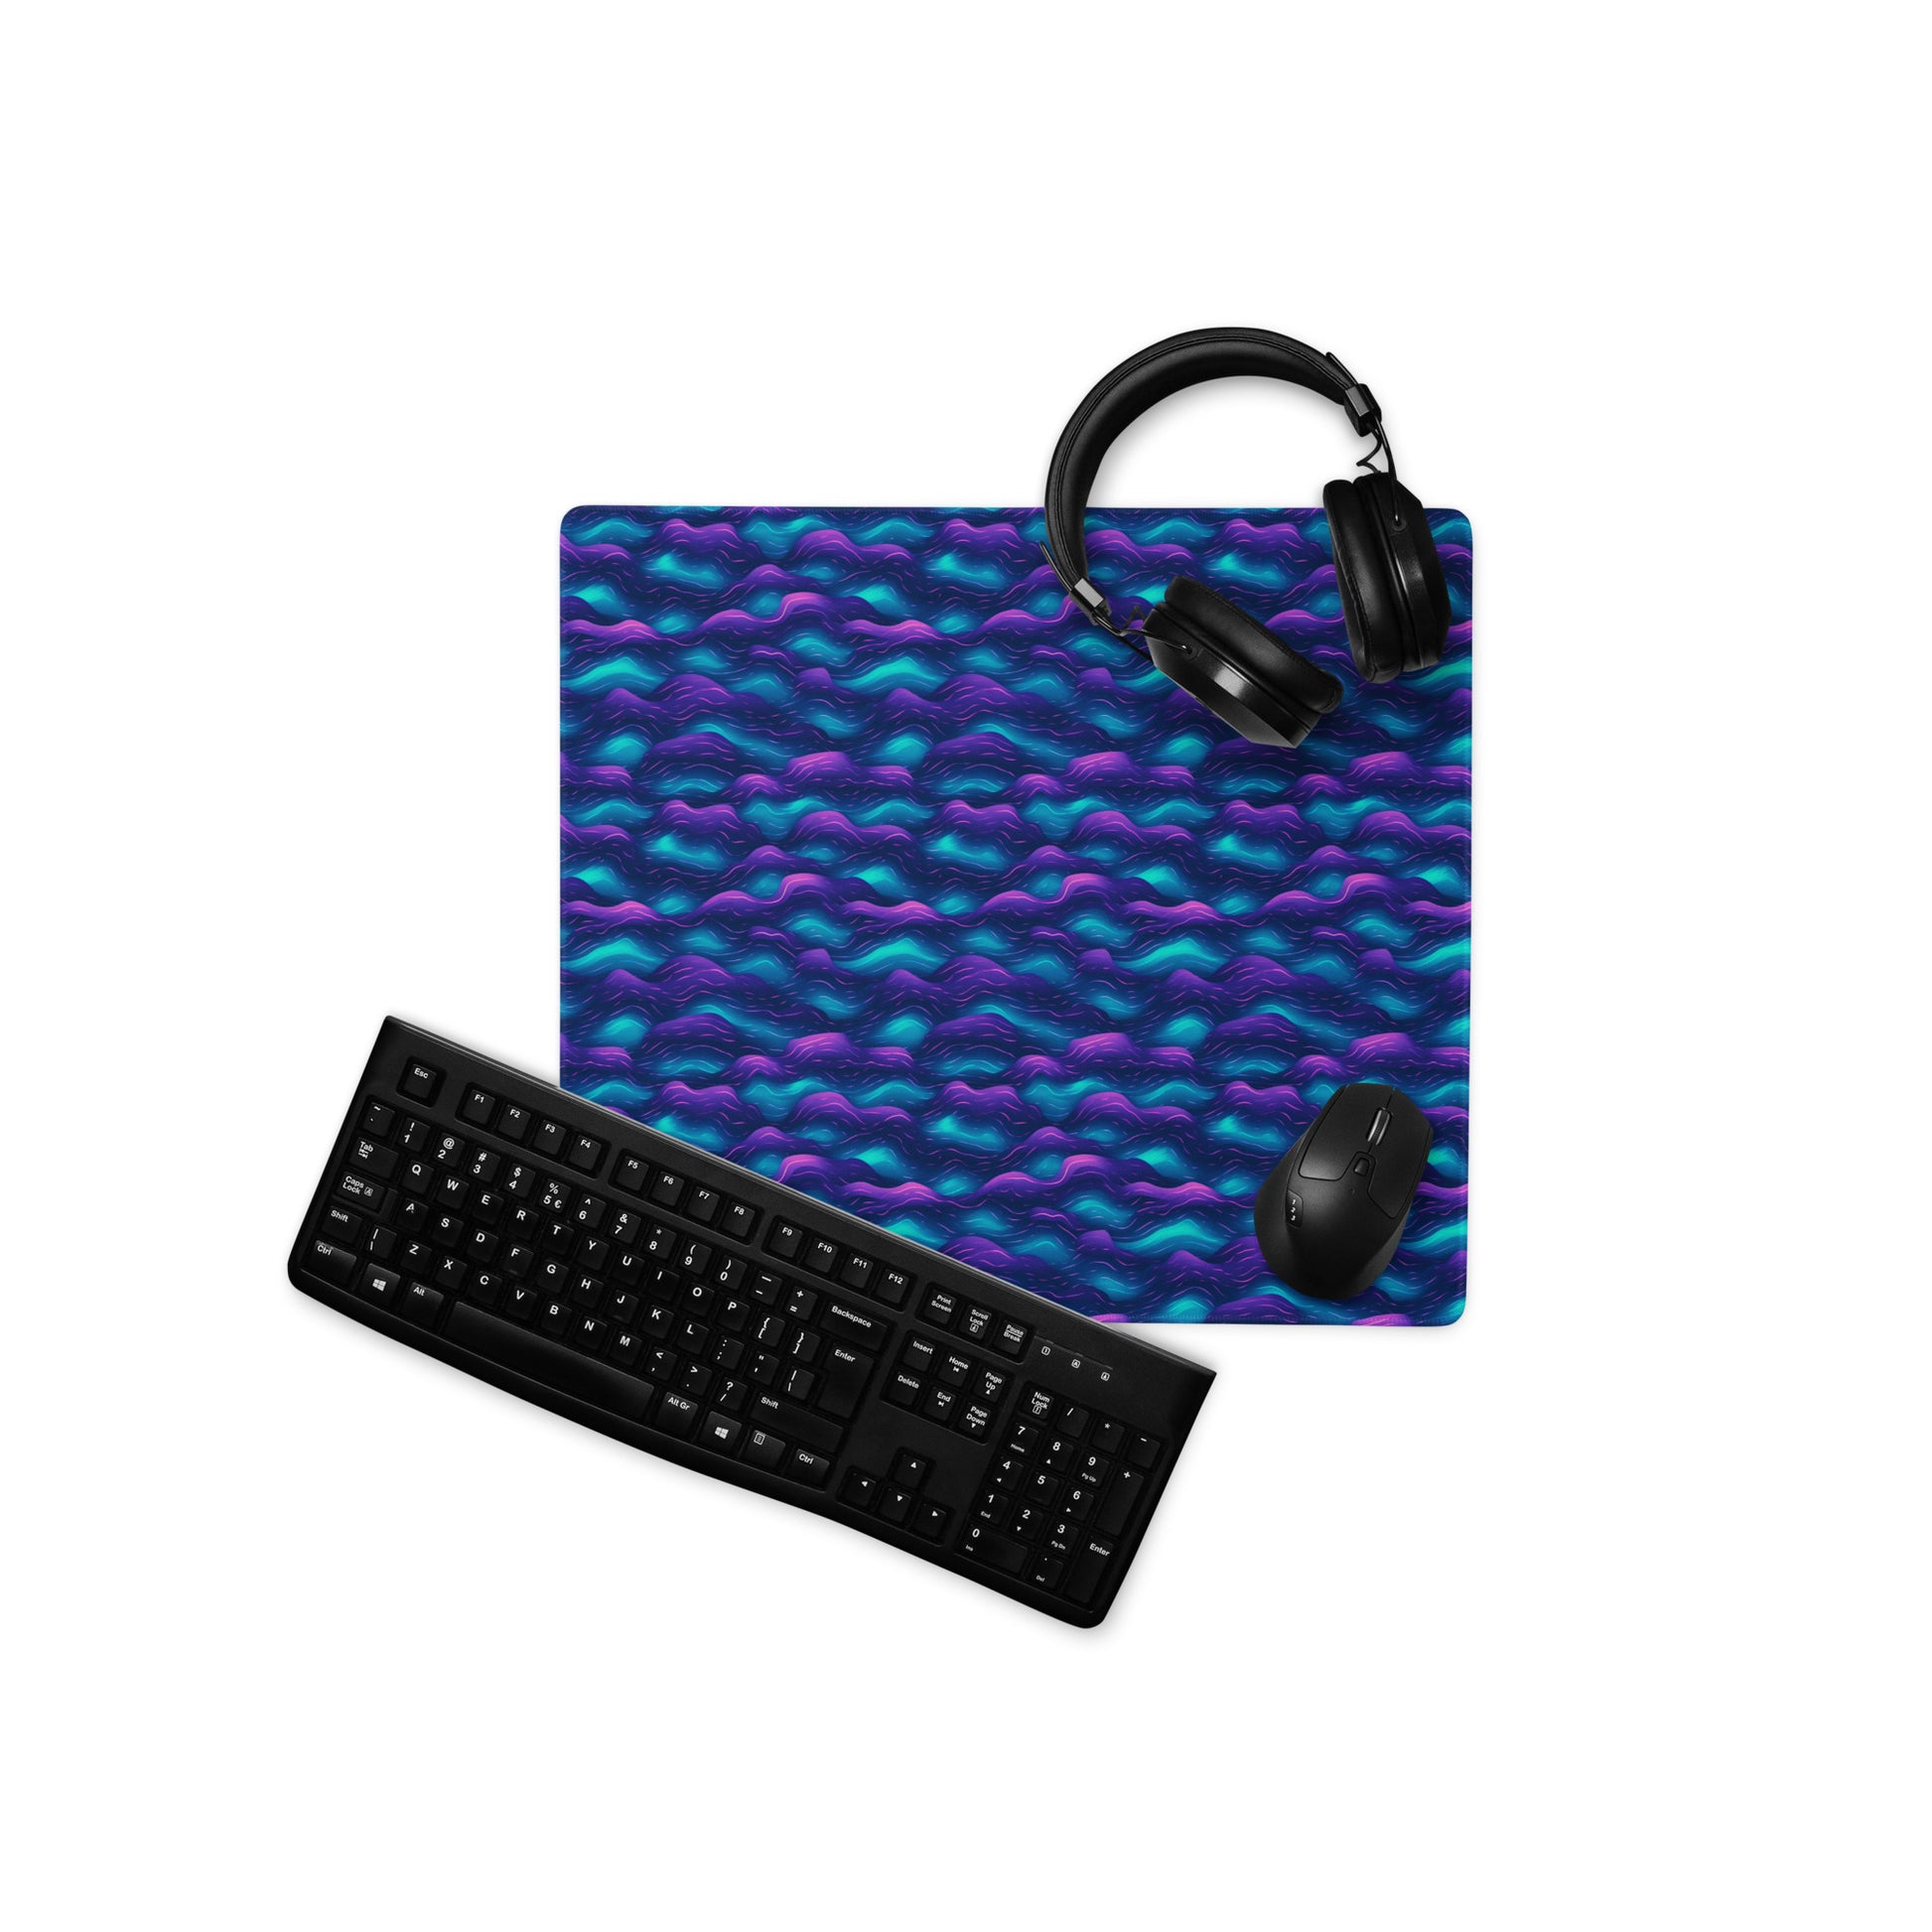 A 18" x 16" desk pad with blue and purple wave pattern. With a keyboard, mouse, and headphones sitting on it.